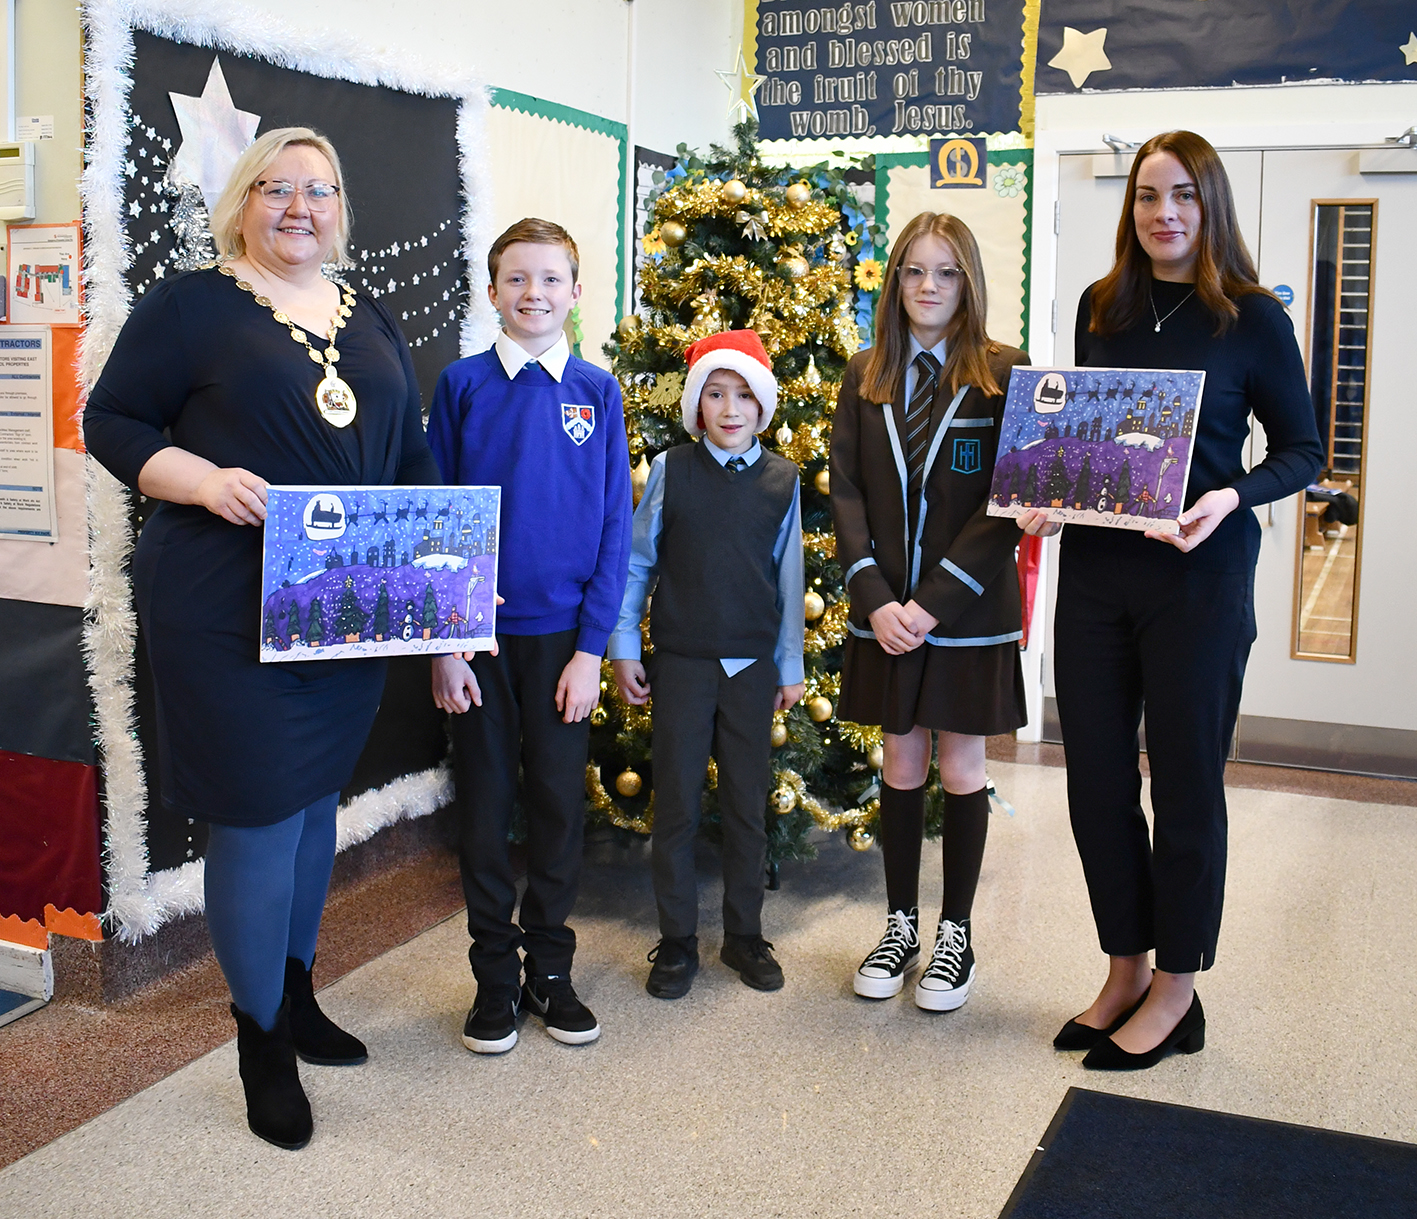 Anthony, Evan and Mya with Provost and Deputy Provost holding his winning Christmas entry